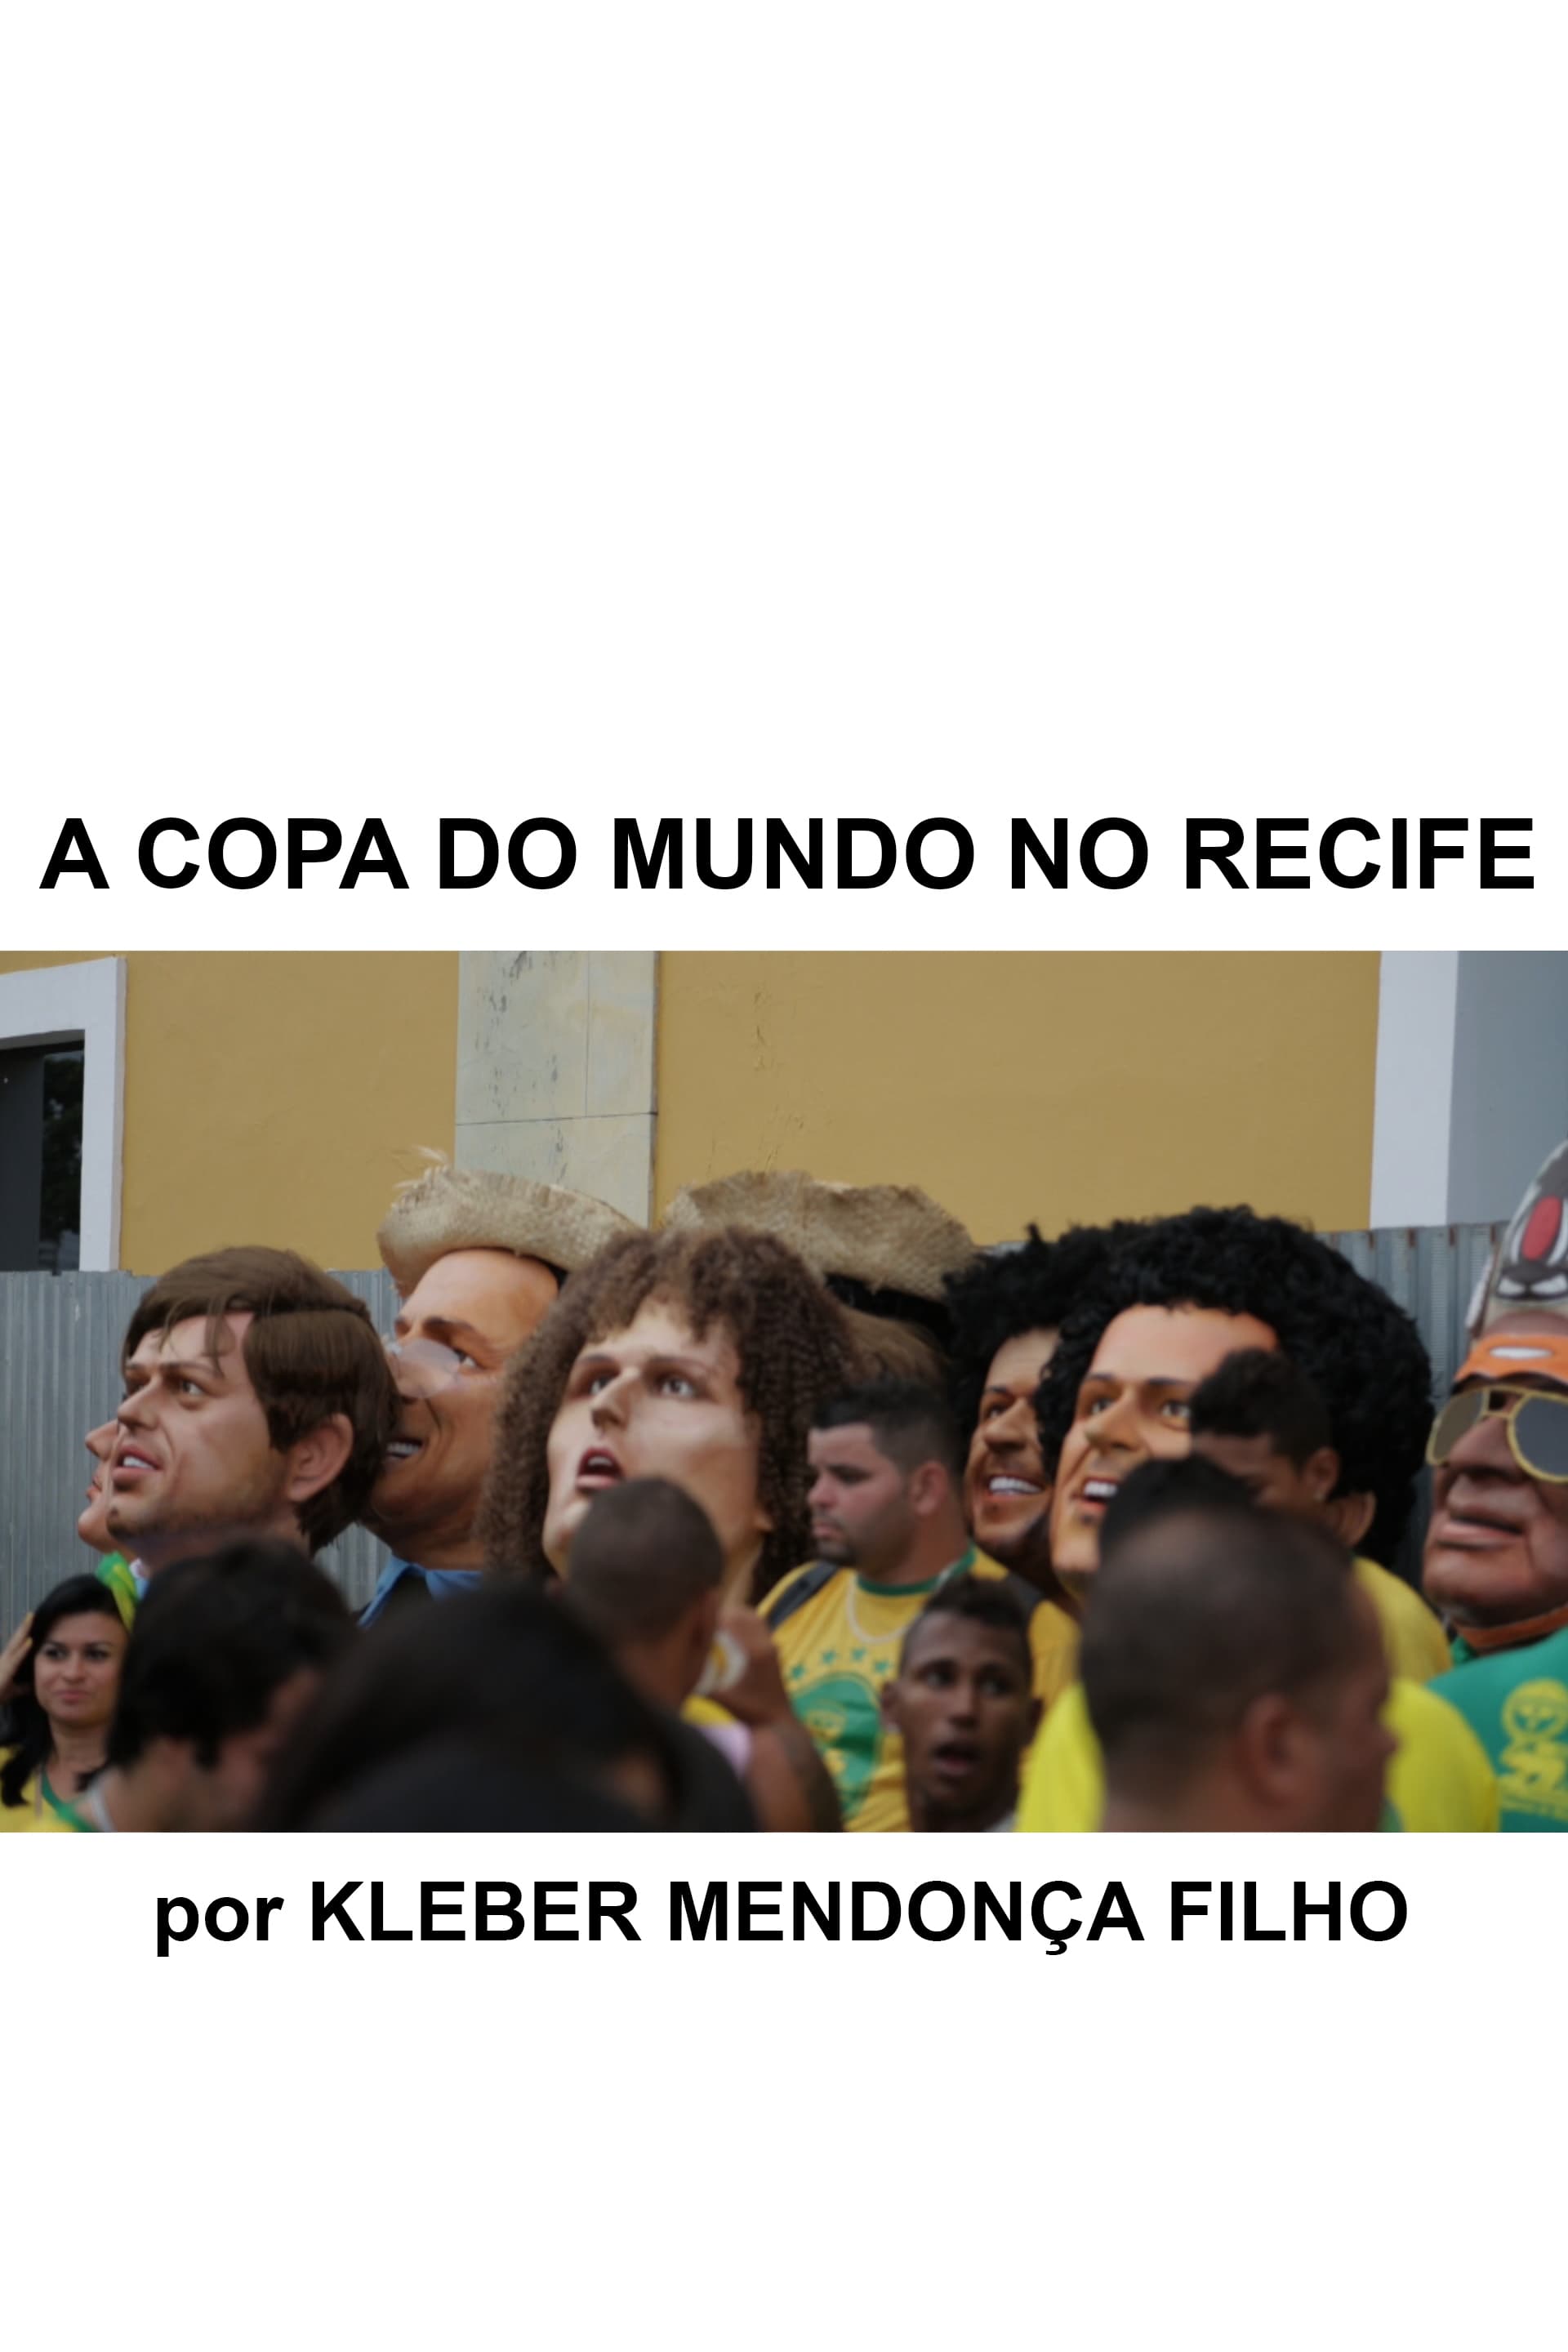 The World Cup in Recife